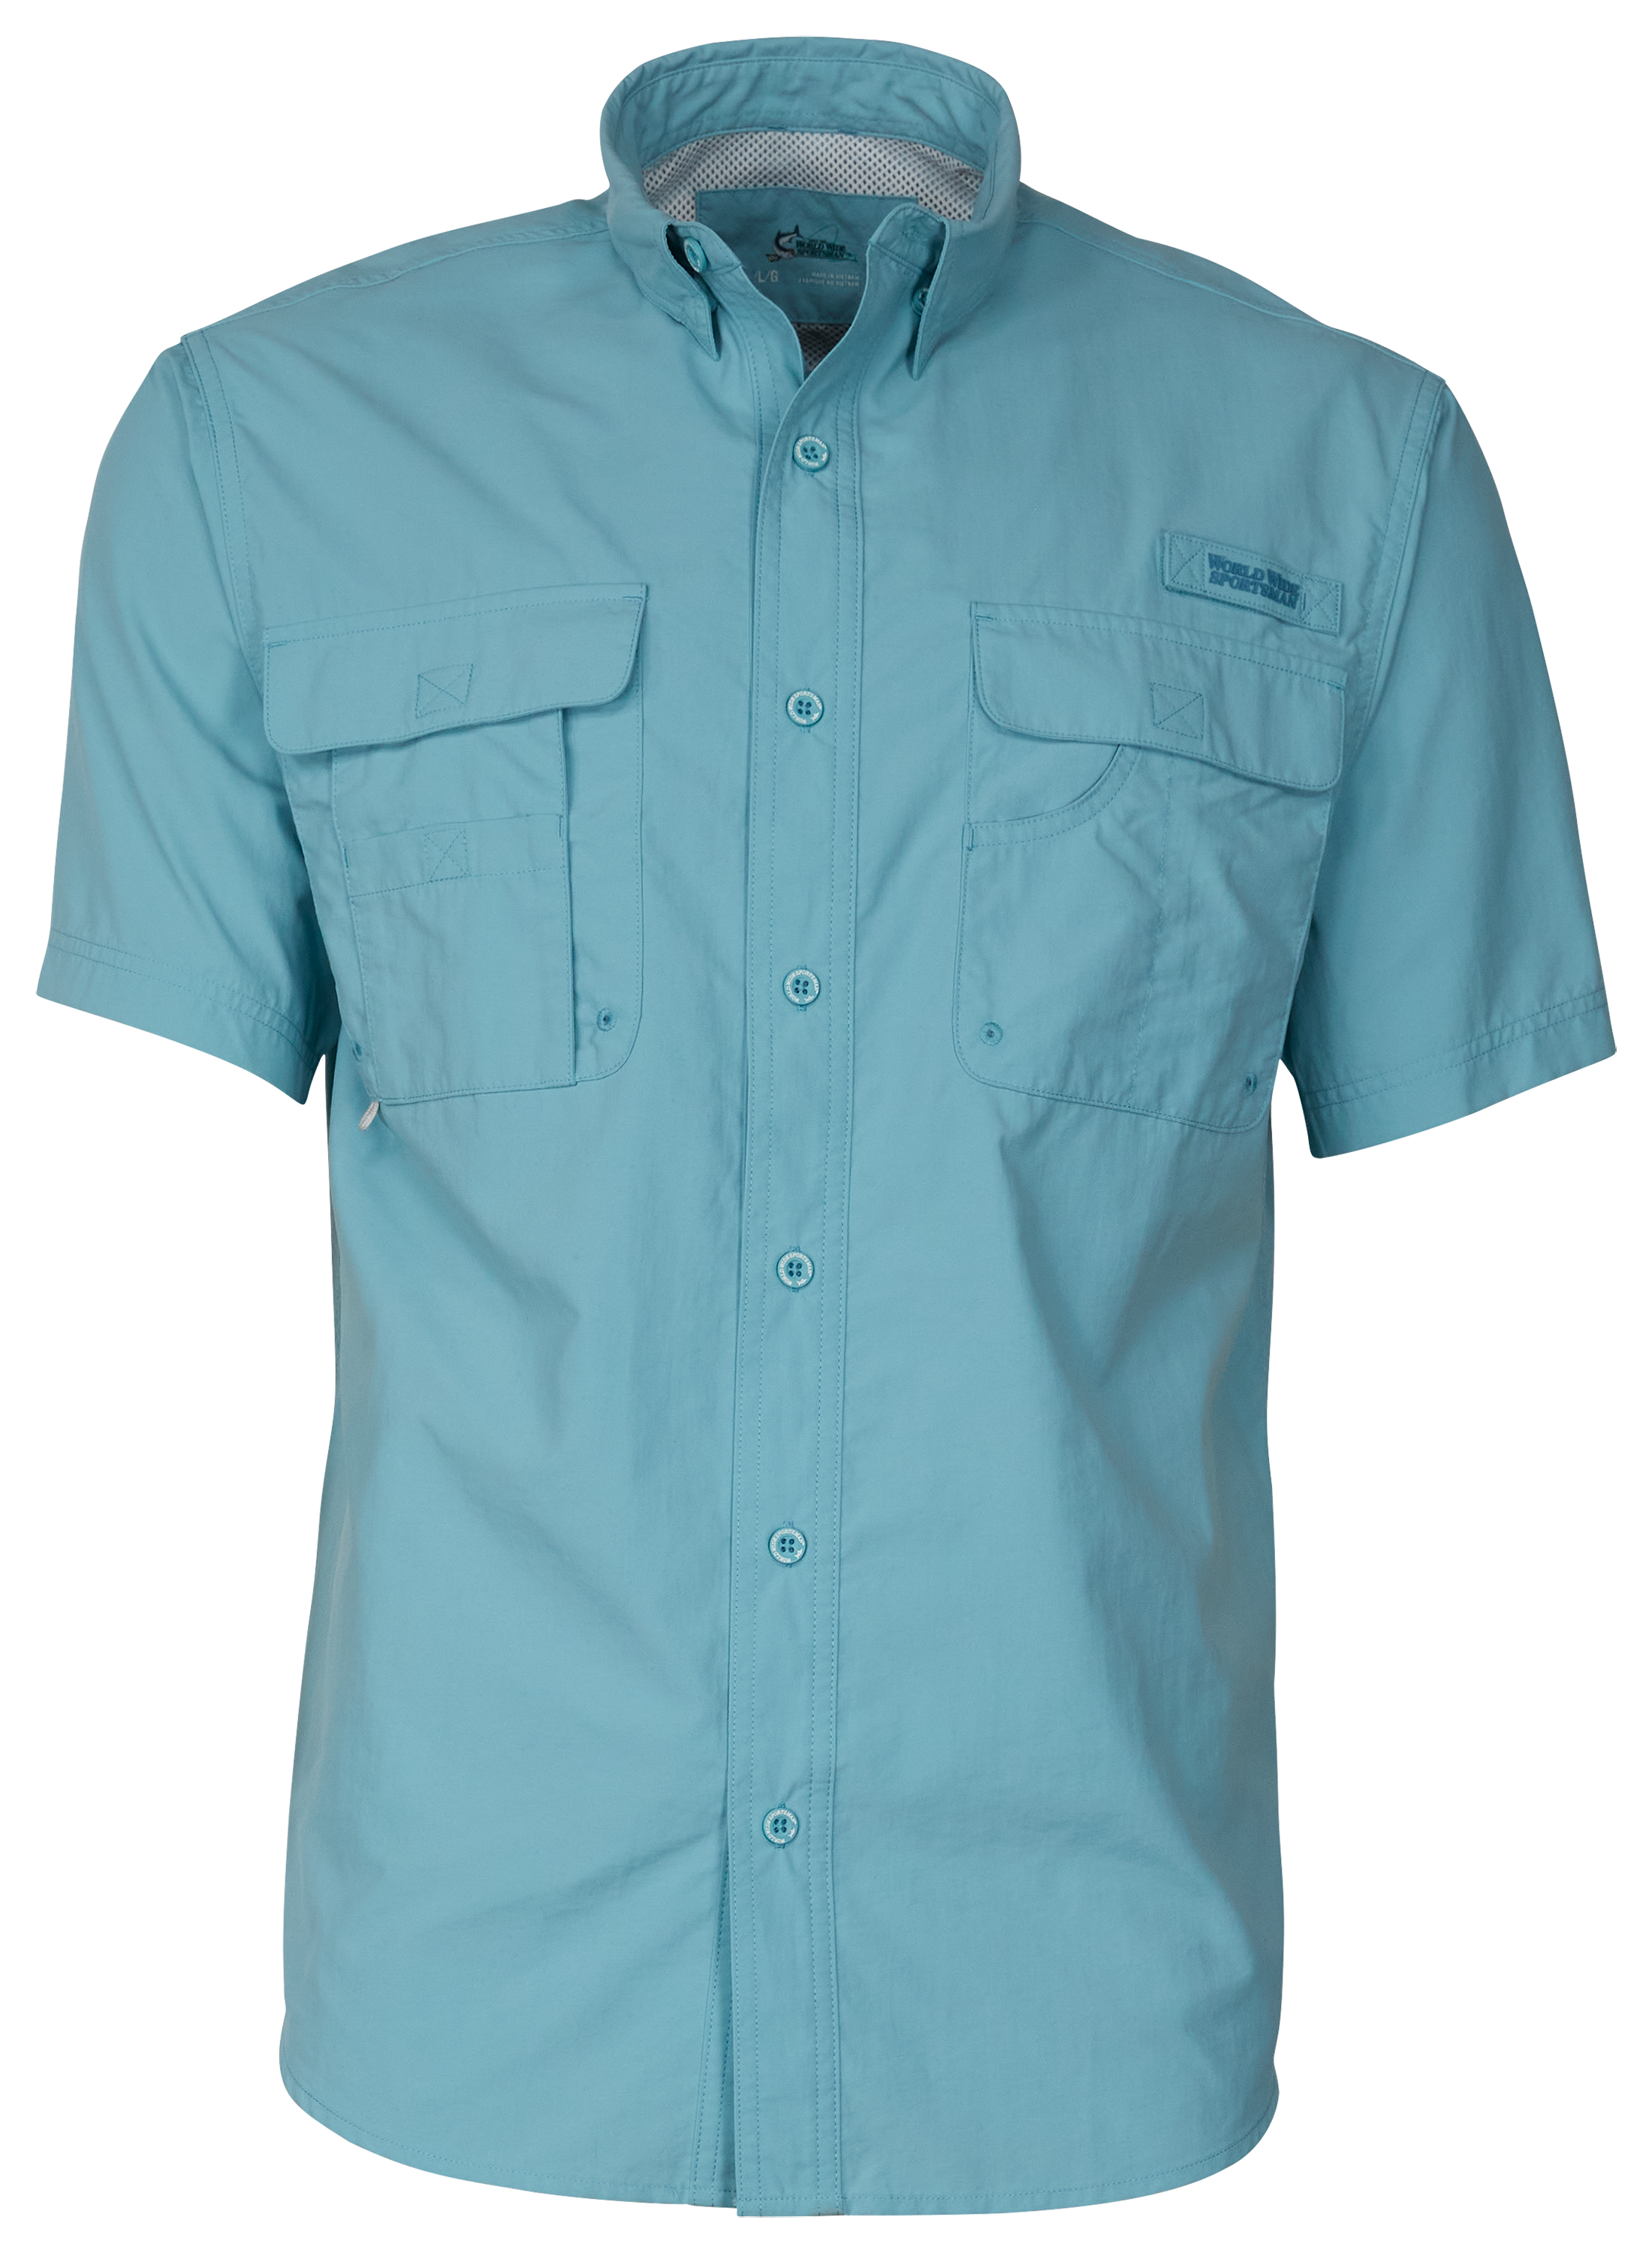 World Wide Sportsman Recycled-Nylon Angler 2.0 Short-Sleeve Button-Down Shirt for Men - Reef Waters - L